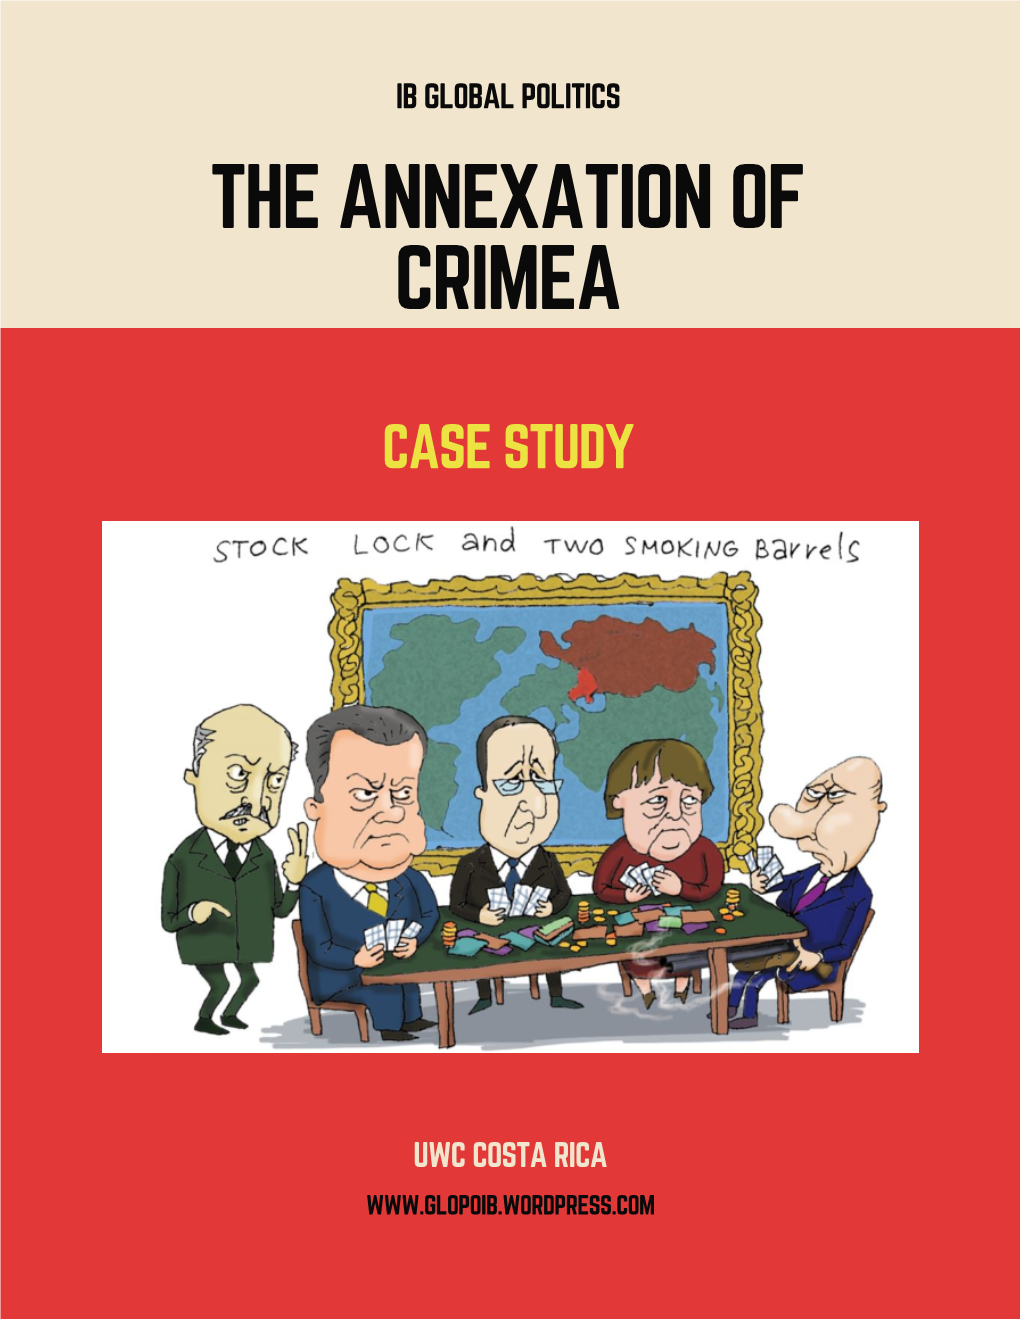 The Annexation of Crimea